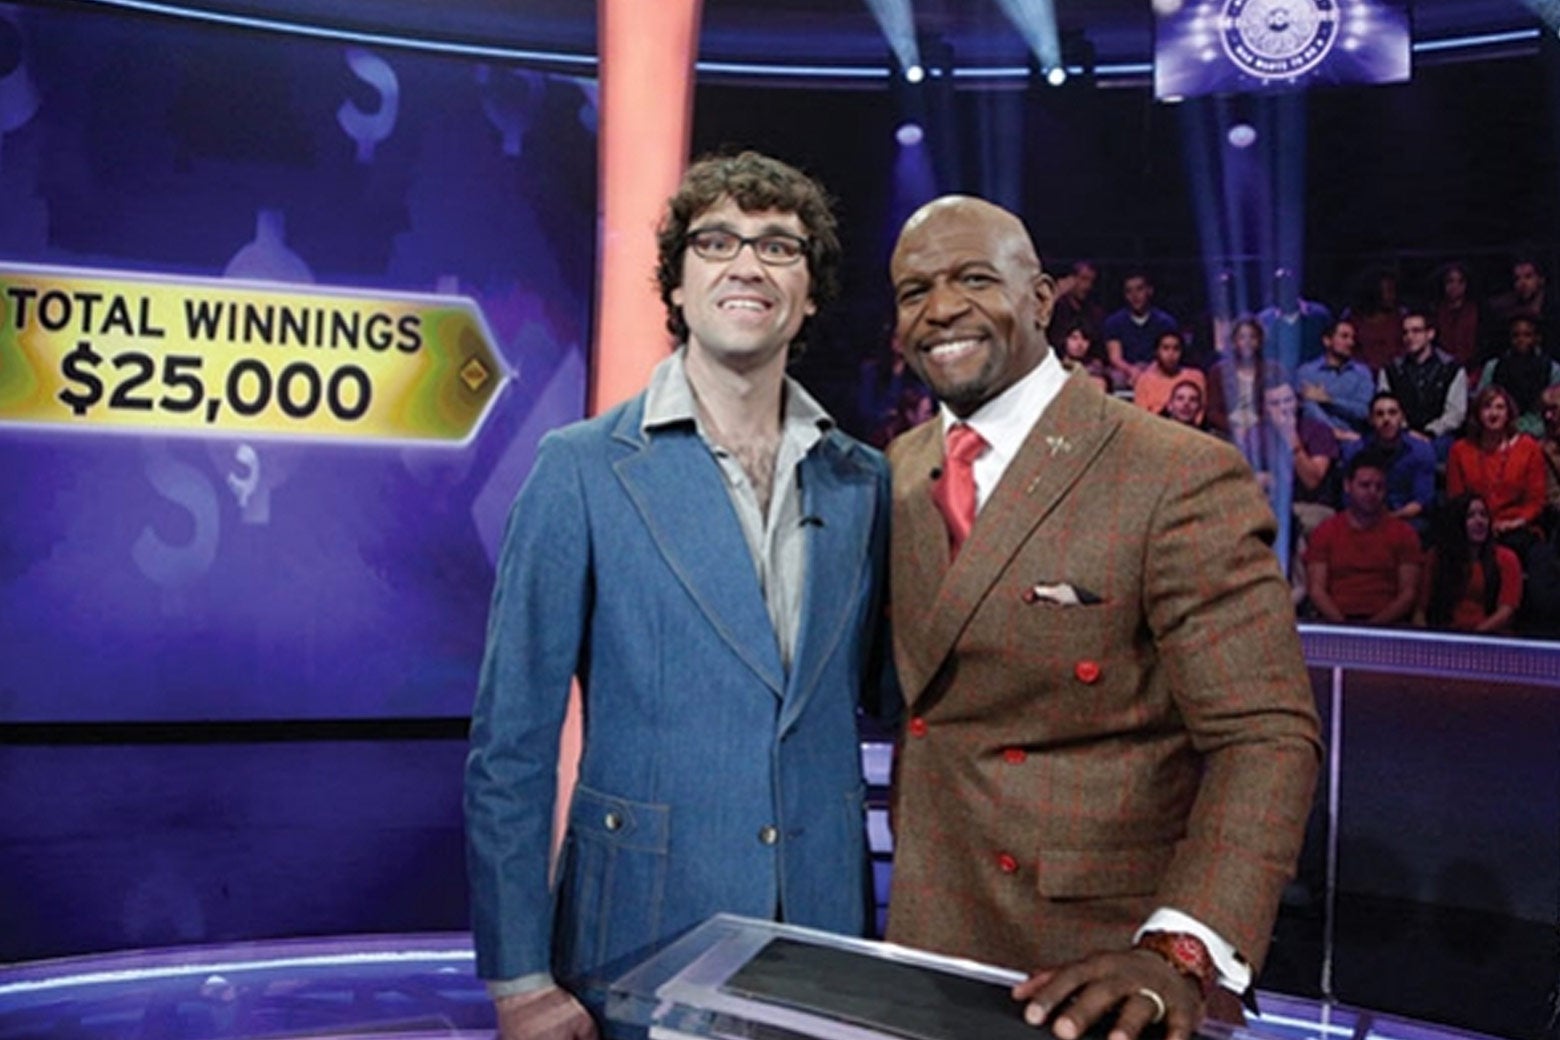 Terry Crews has his arm around Justin Peters on the set of Millionaire. Behind them, the studio audience and a screen that says "TOTAL WINNINGS $25,000."